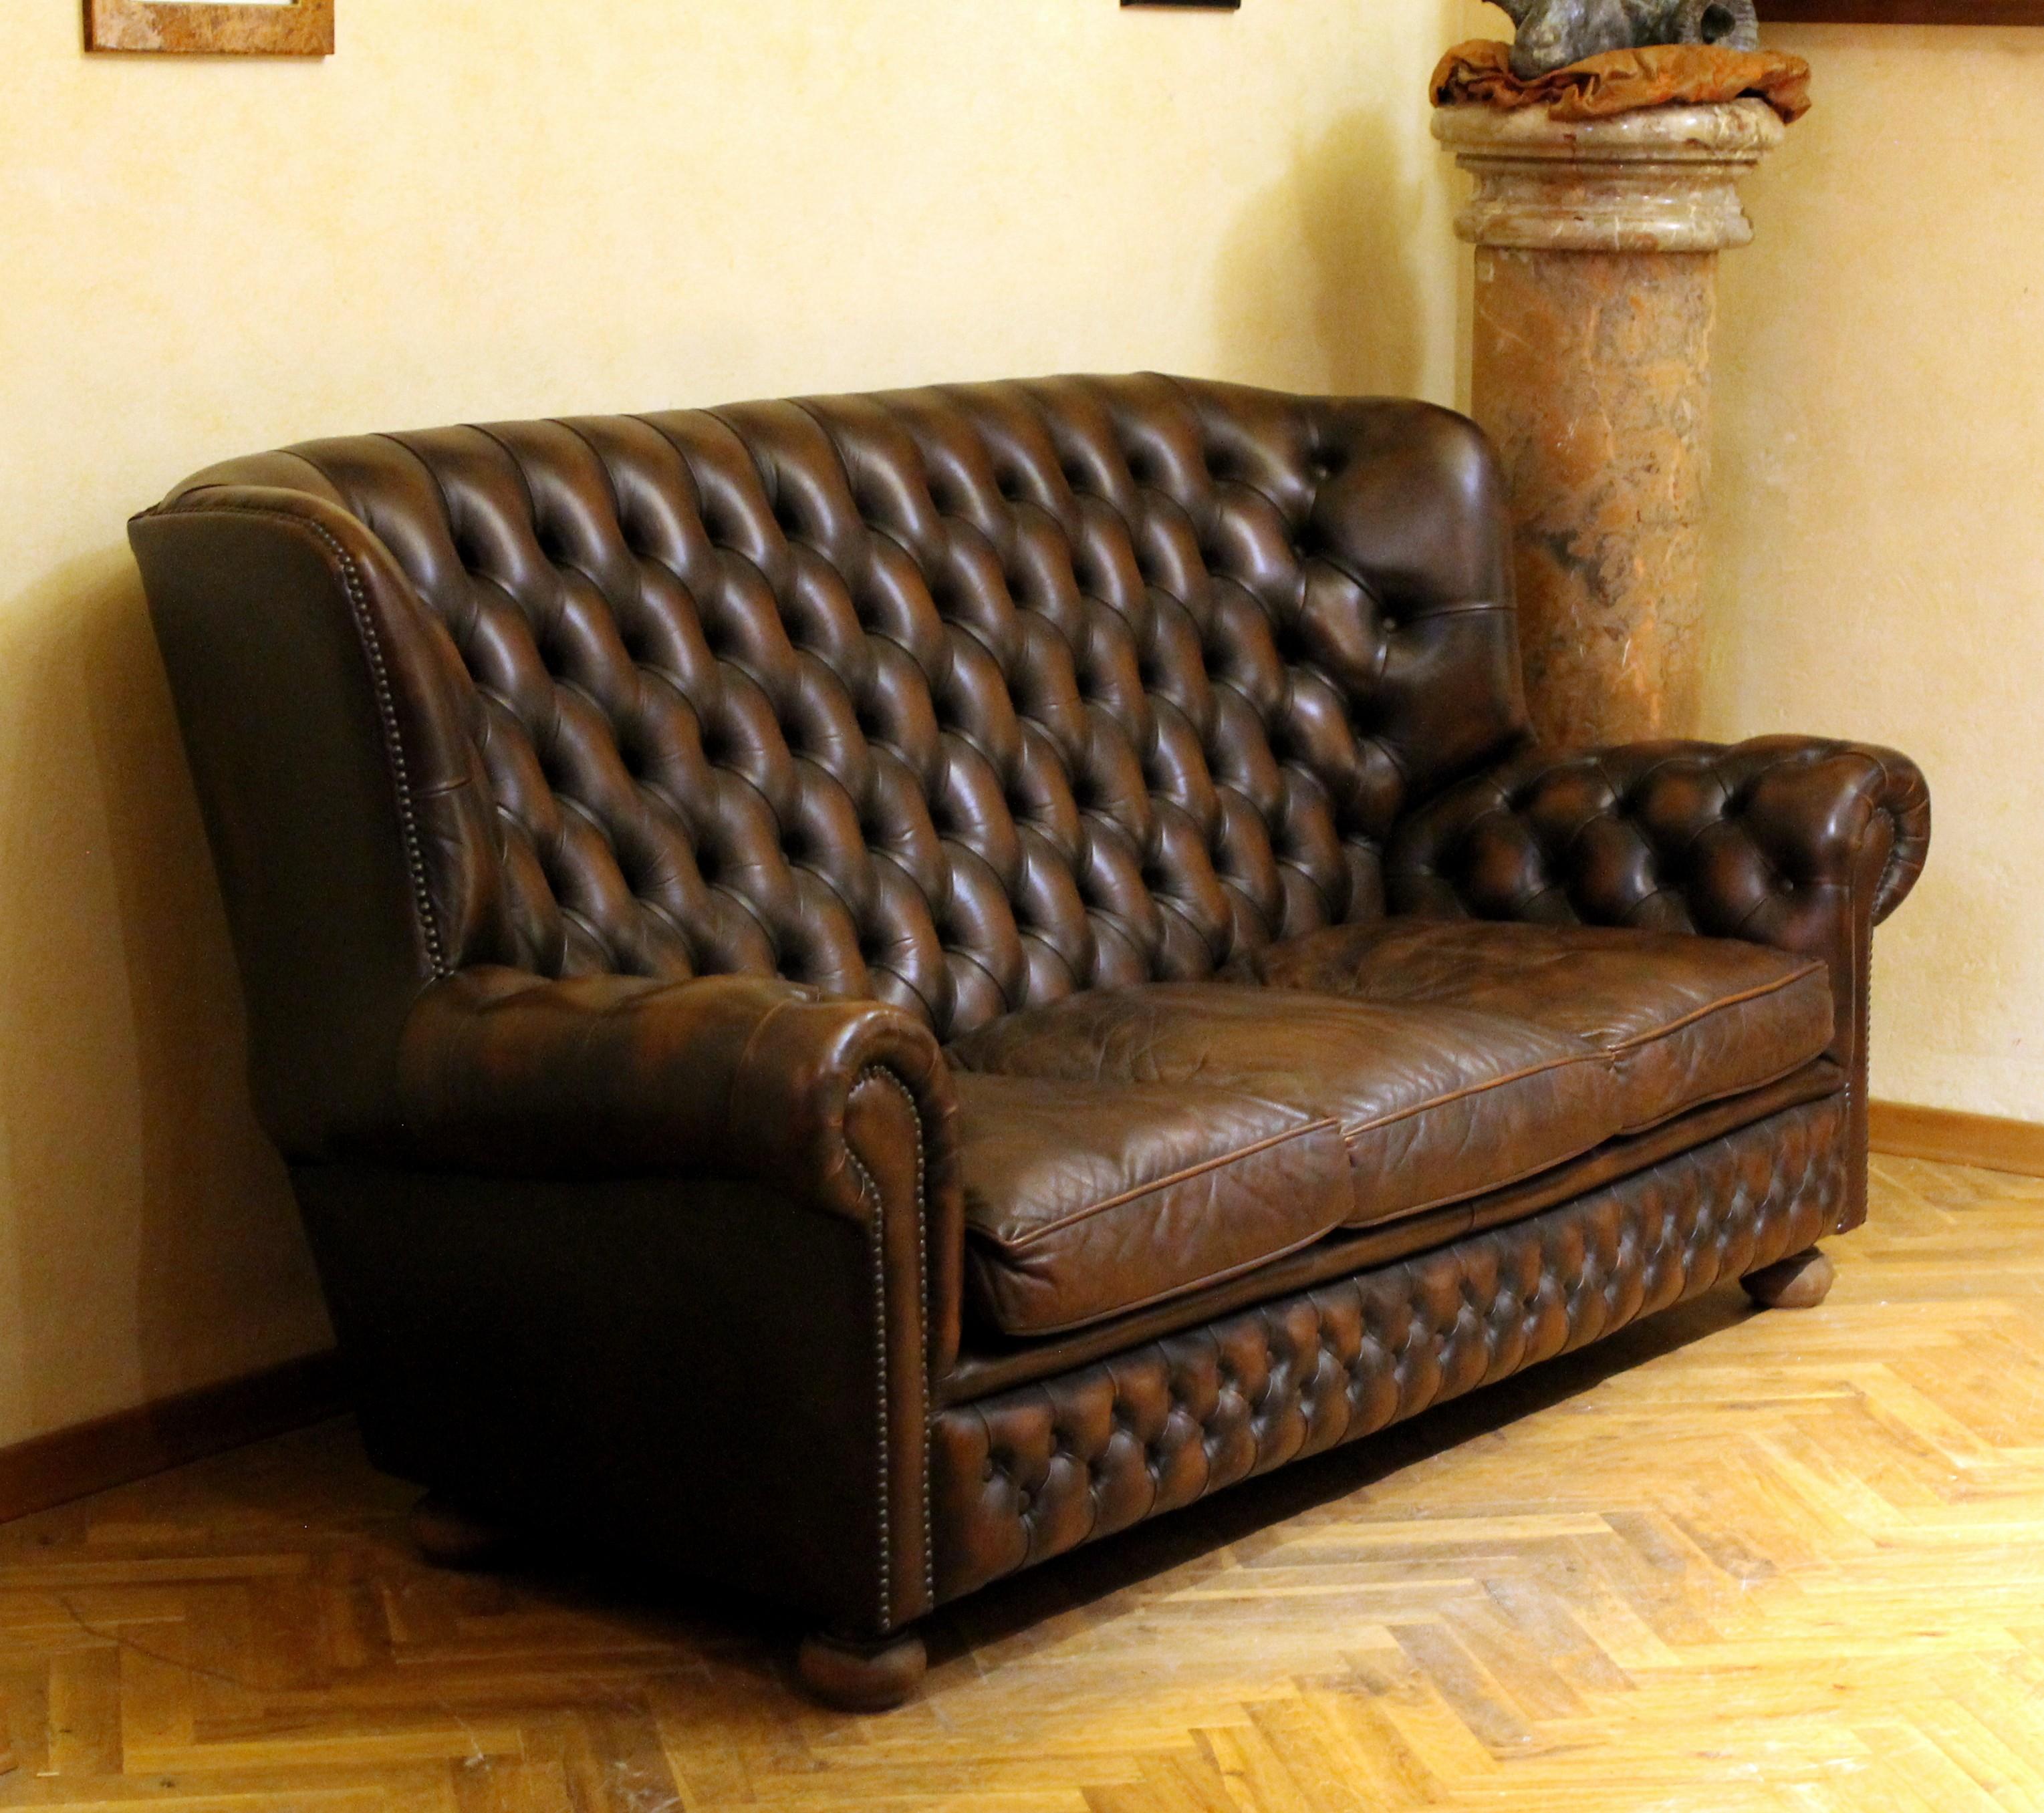 English Vintage Chesterfield Sofa Brown Leather High Back Three Seats and Button Tufted